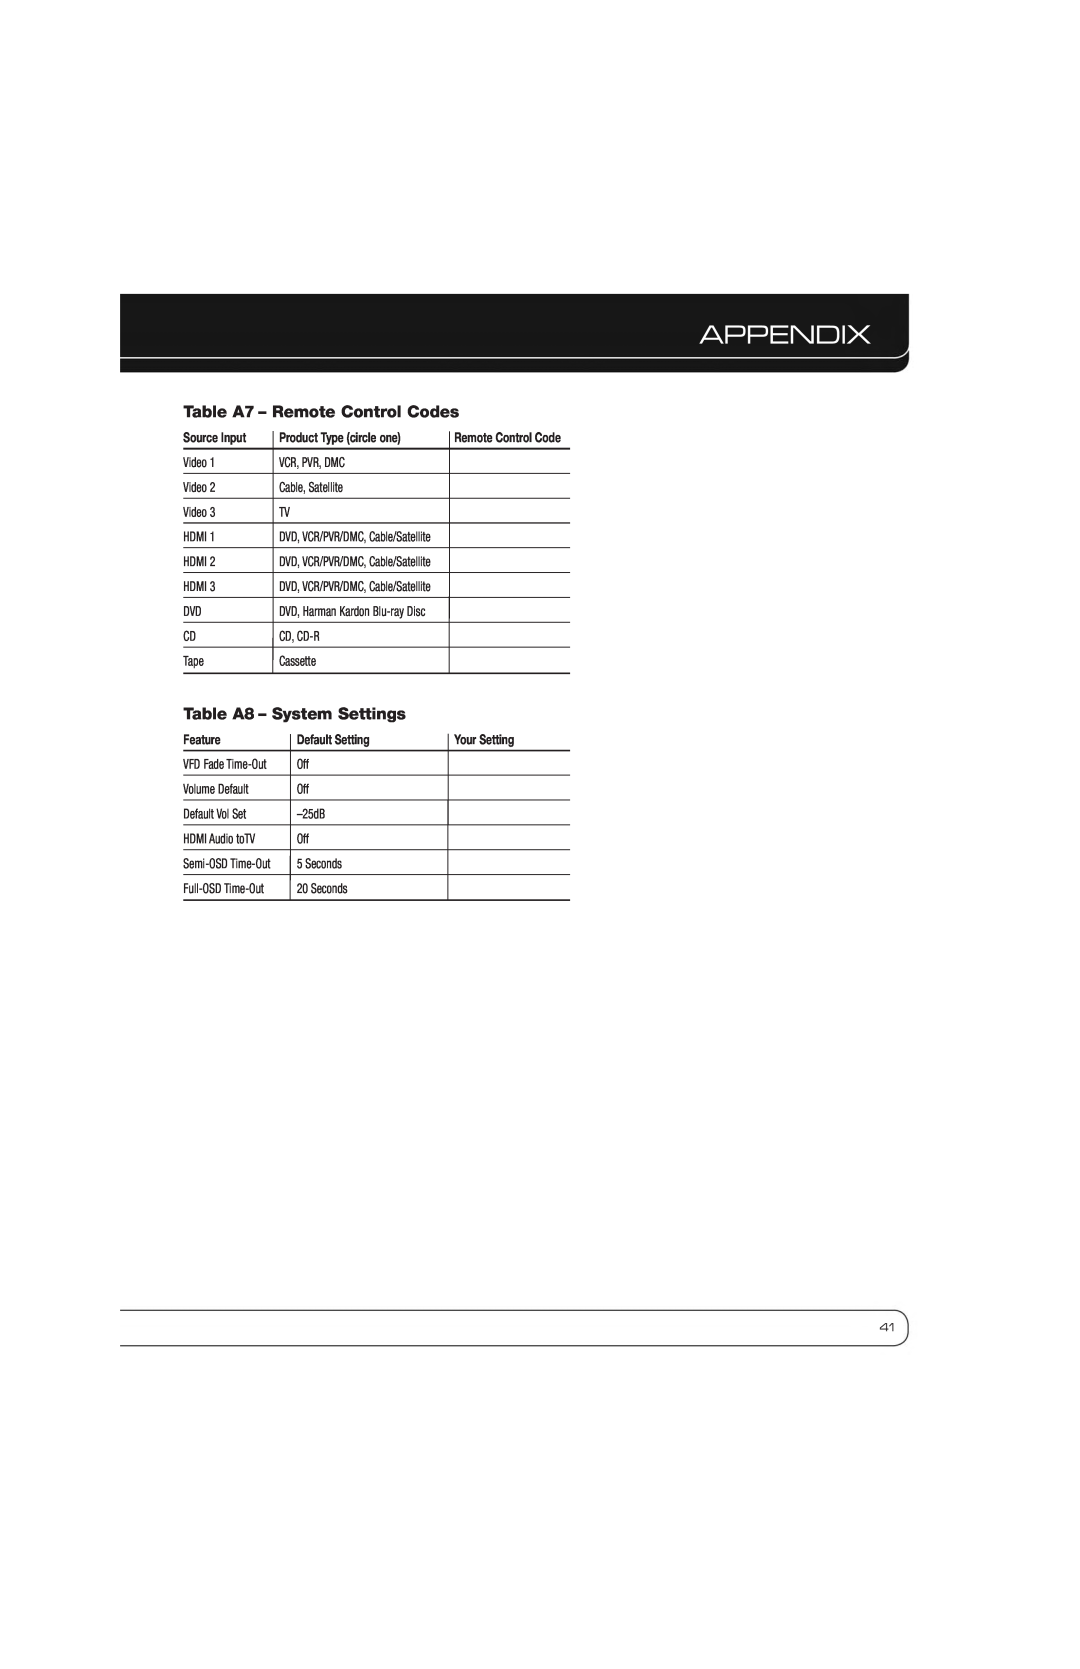 Harman-Kardon AVR 1600 Table A7 - Remote Control Codes, Table A8 - System Settings, Appendix, Source Input, Feature 